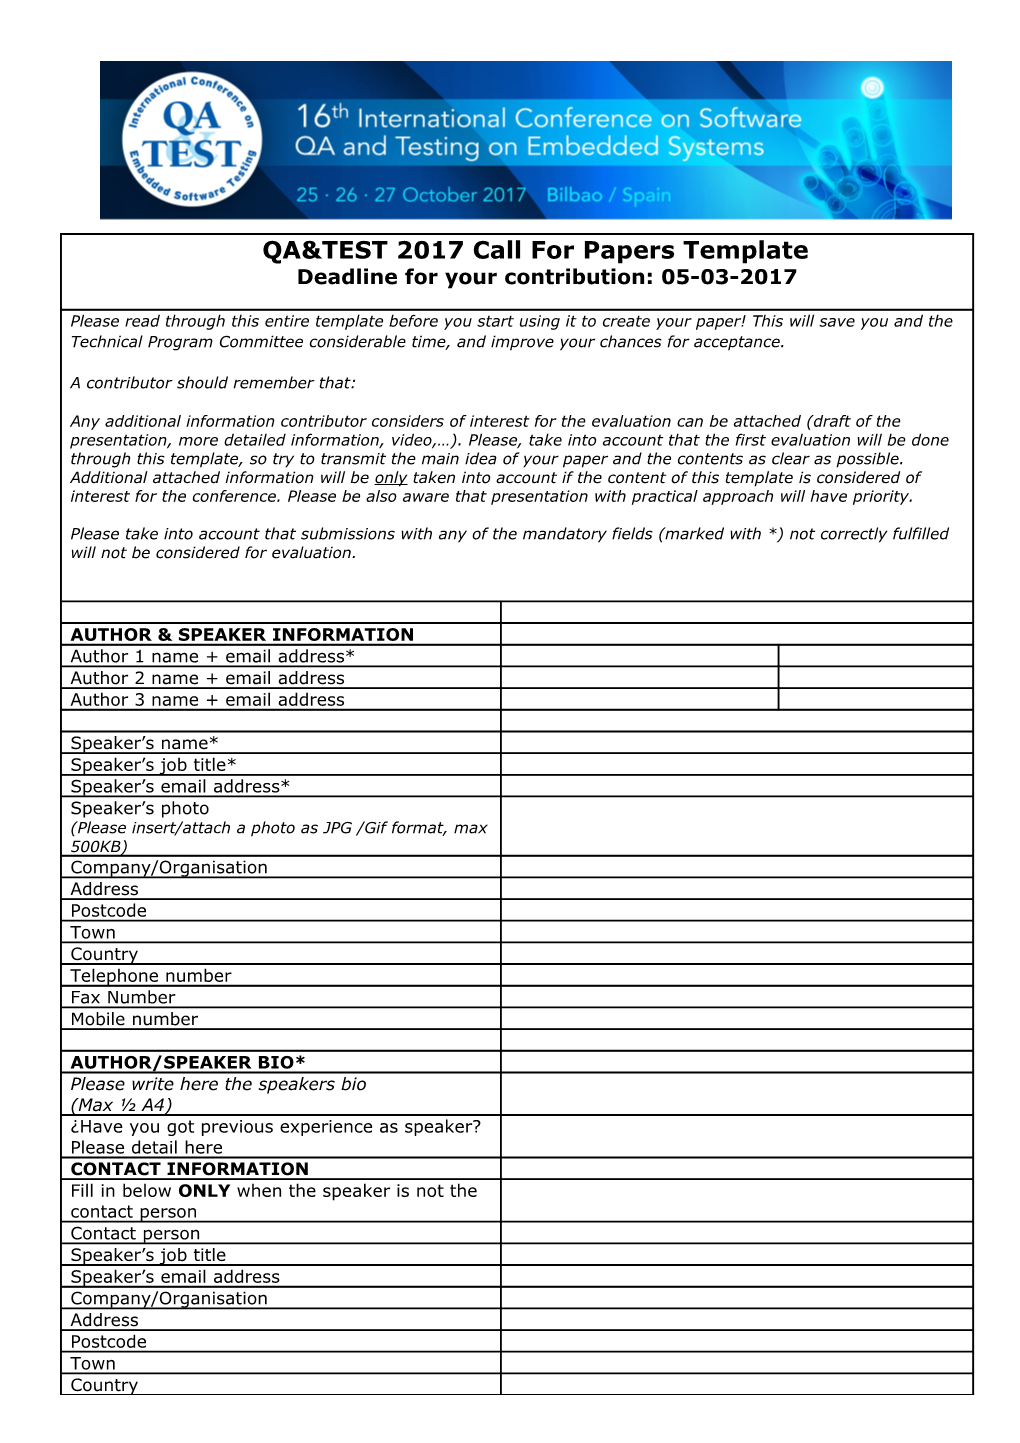 QA&TEST 2016 Call for Paper Template